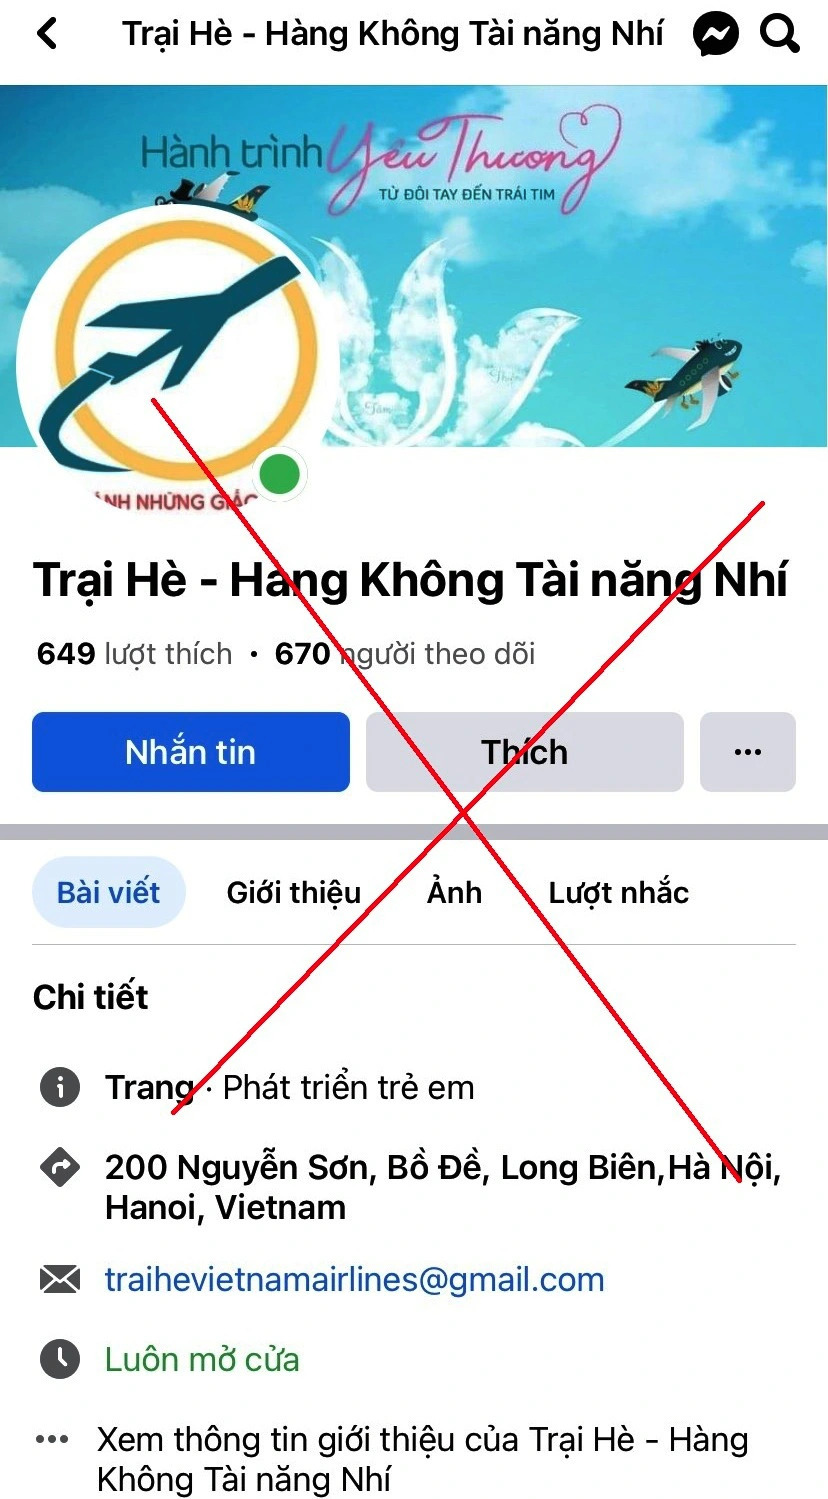 Vietnamese woman loses over $100,000 in online scam illegally using Vietnam Airlines images